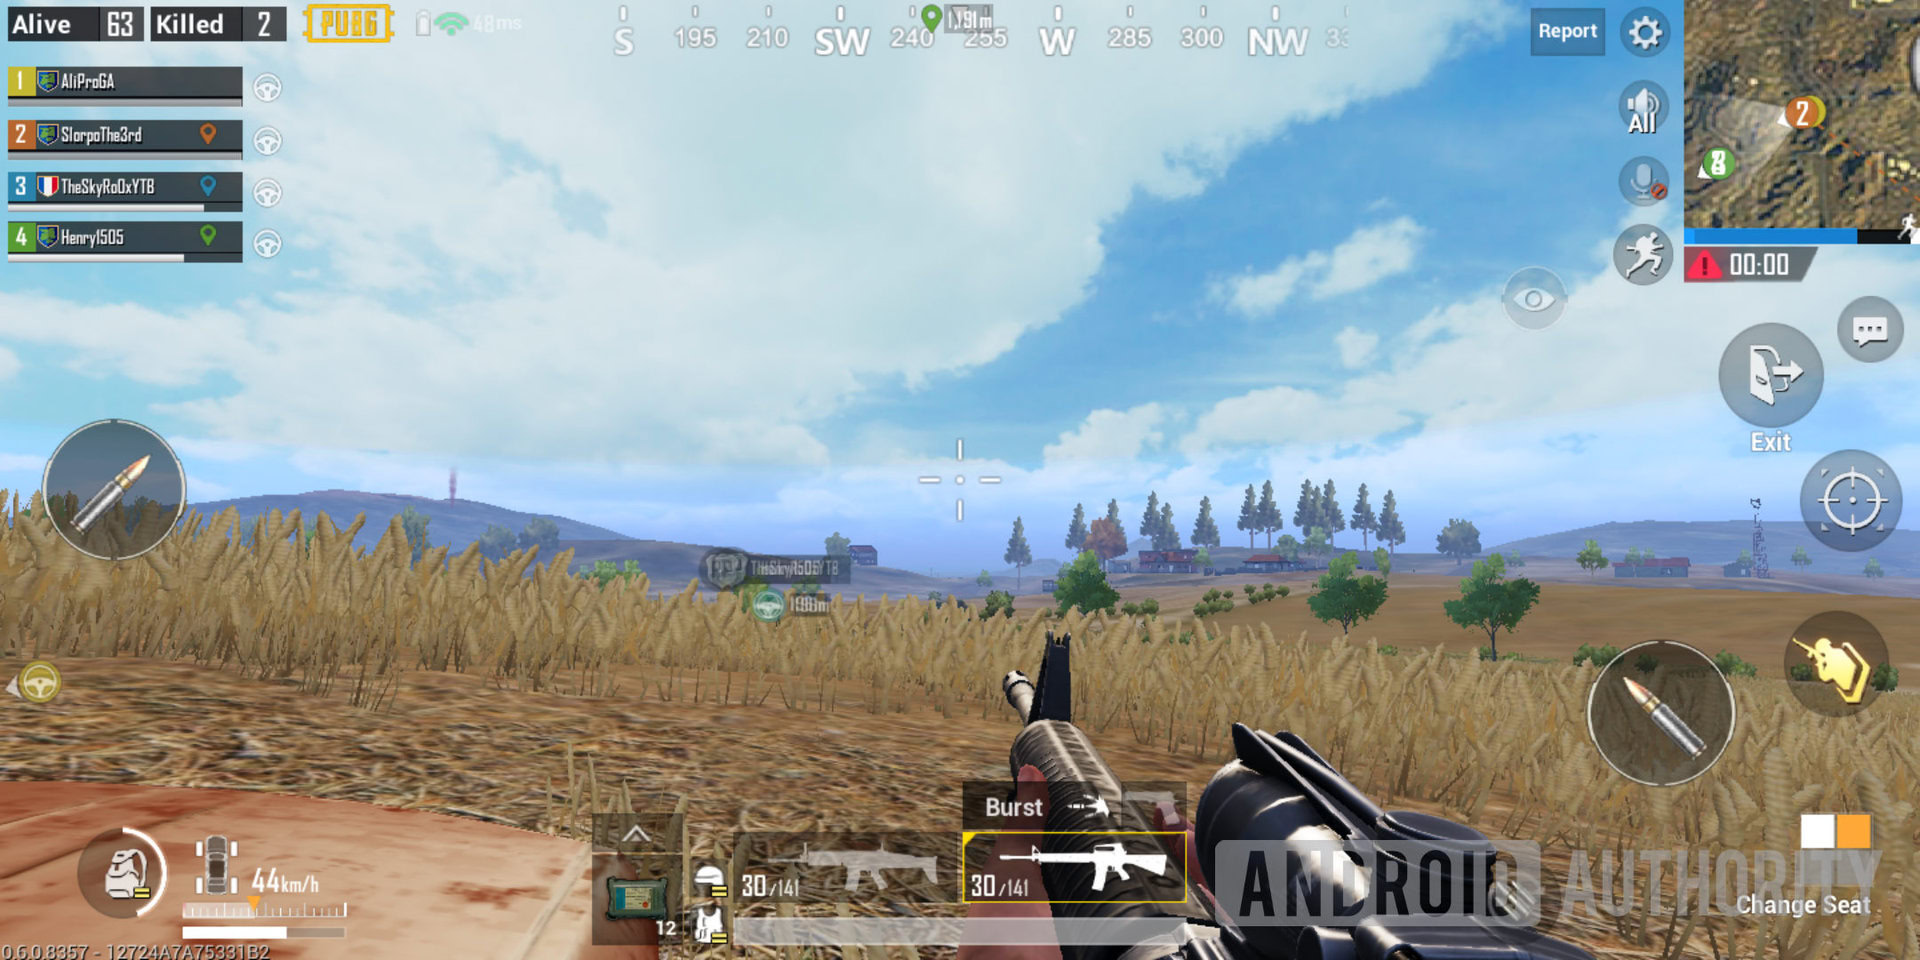 PUBG Mobile inches closer to Fortnite with Royale Pass in ... - 2160 x 1080 jpeg 358kB